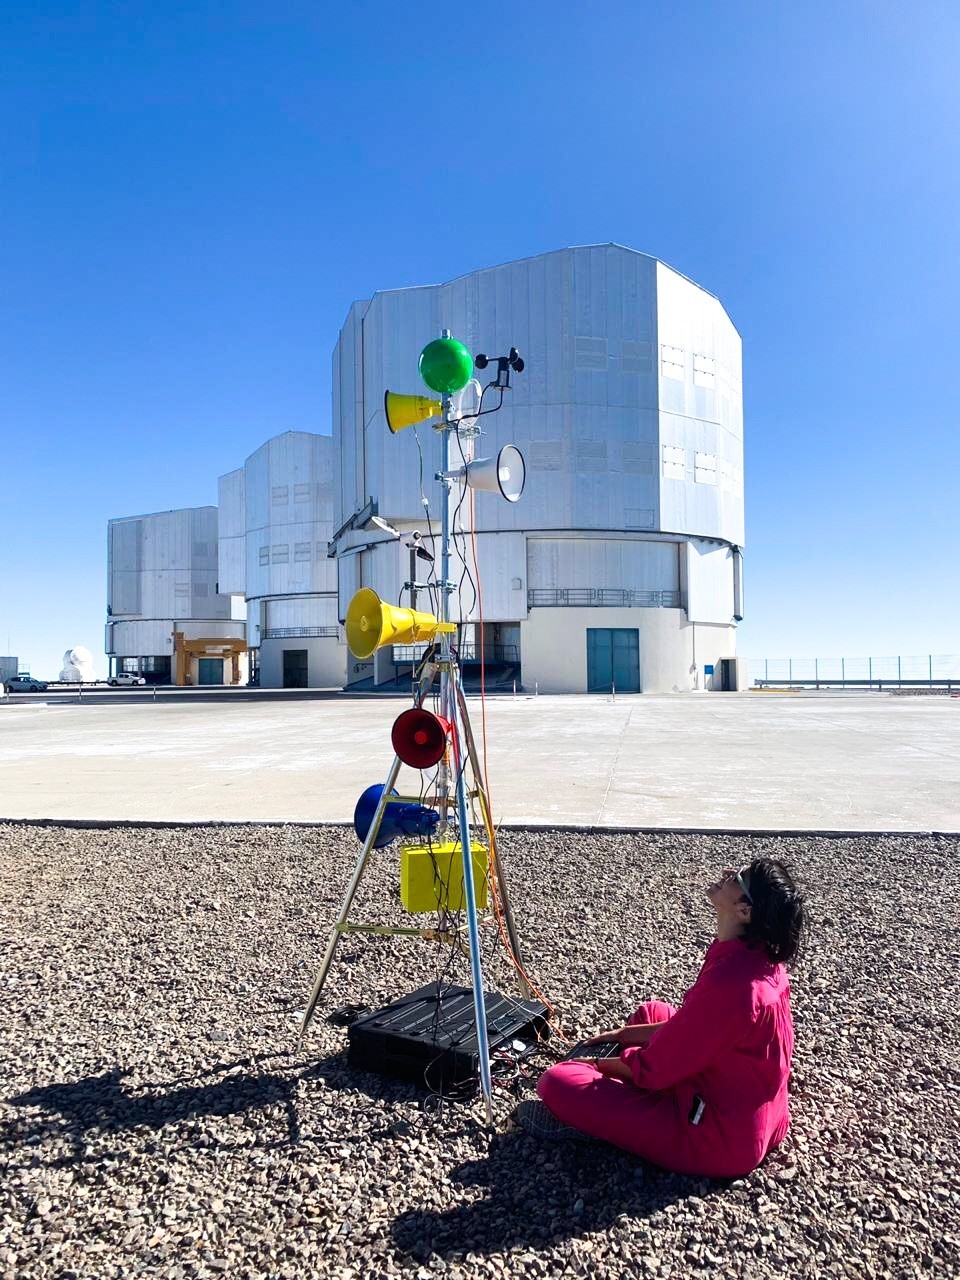 Nicole L'Huillier, La PARACANTORA in the Paranal Observatory, Chile. Photo by Barbara Nuñez. Courtesy the artist